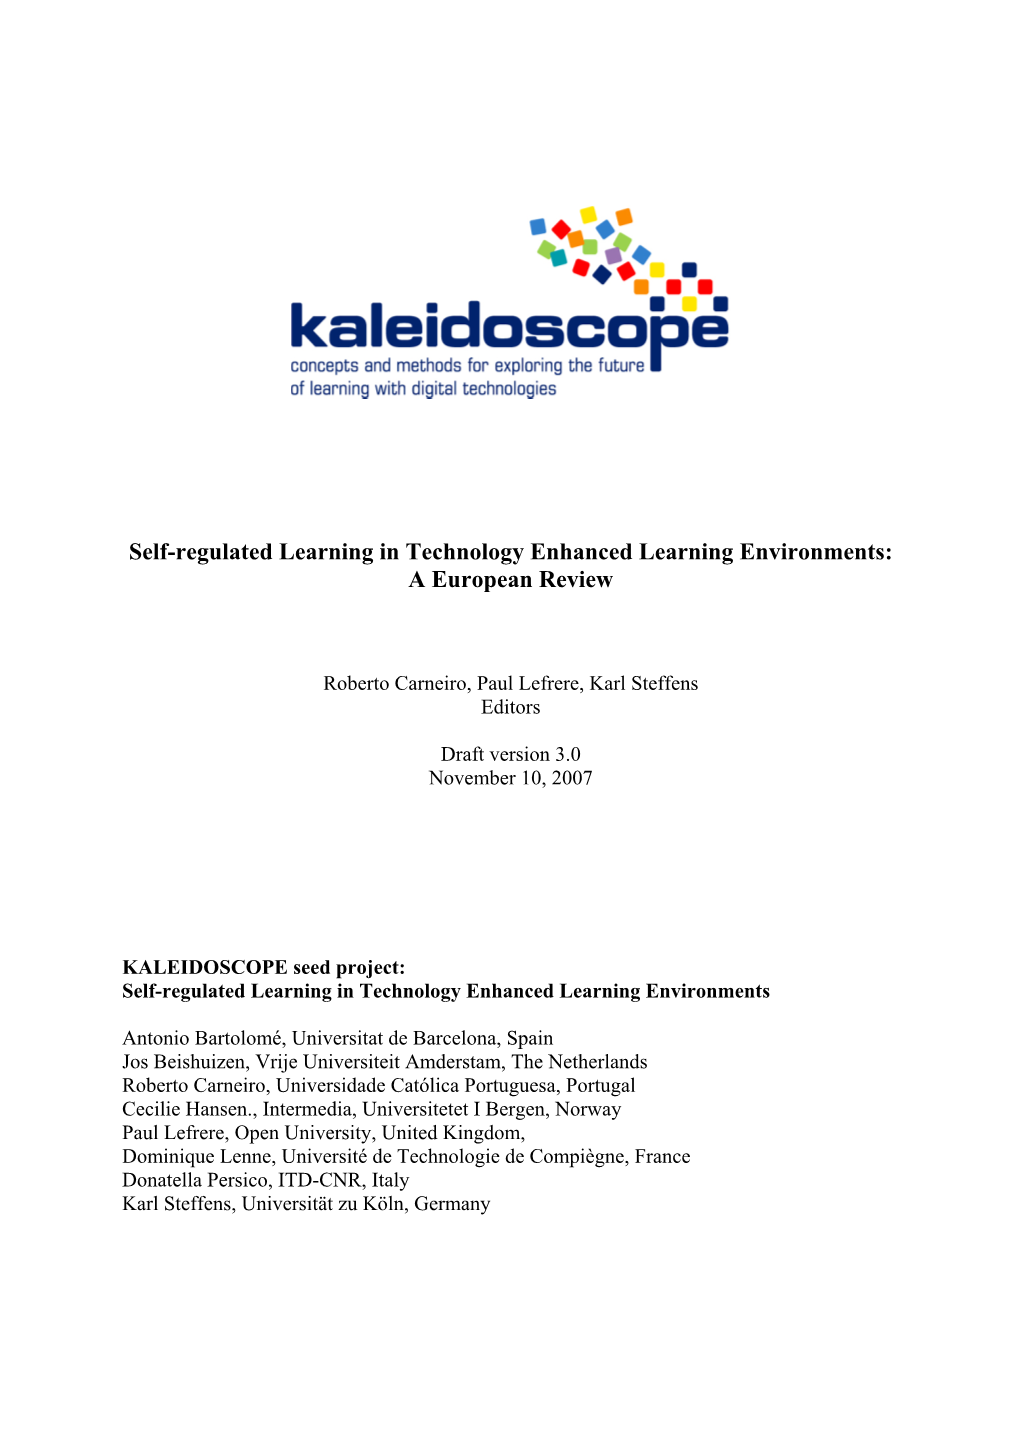 Self-Regulated Learning in Technology Enhanced Learning Environments: a European Review